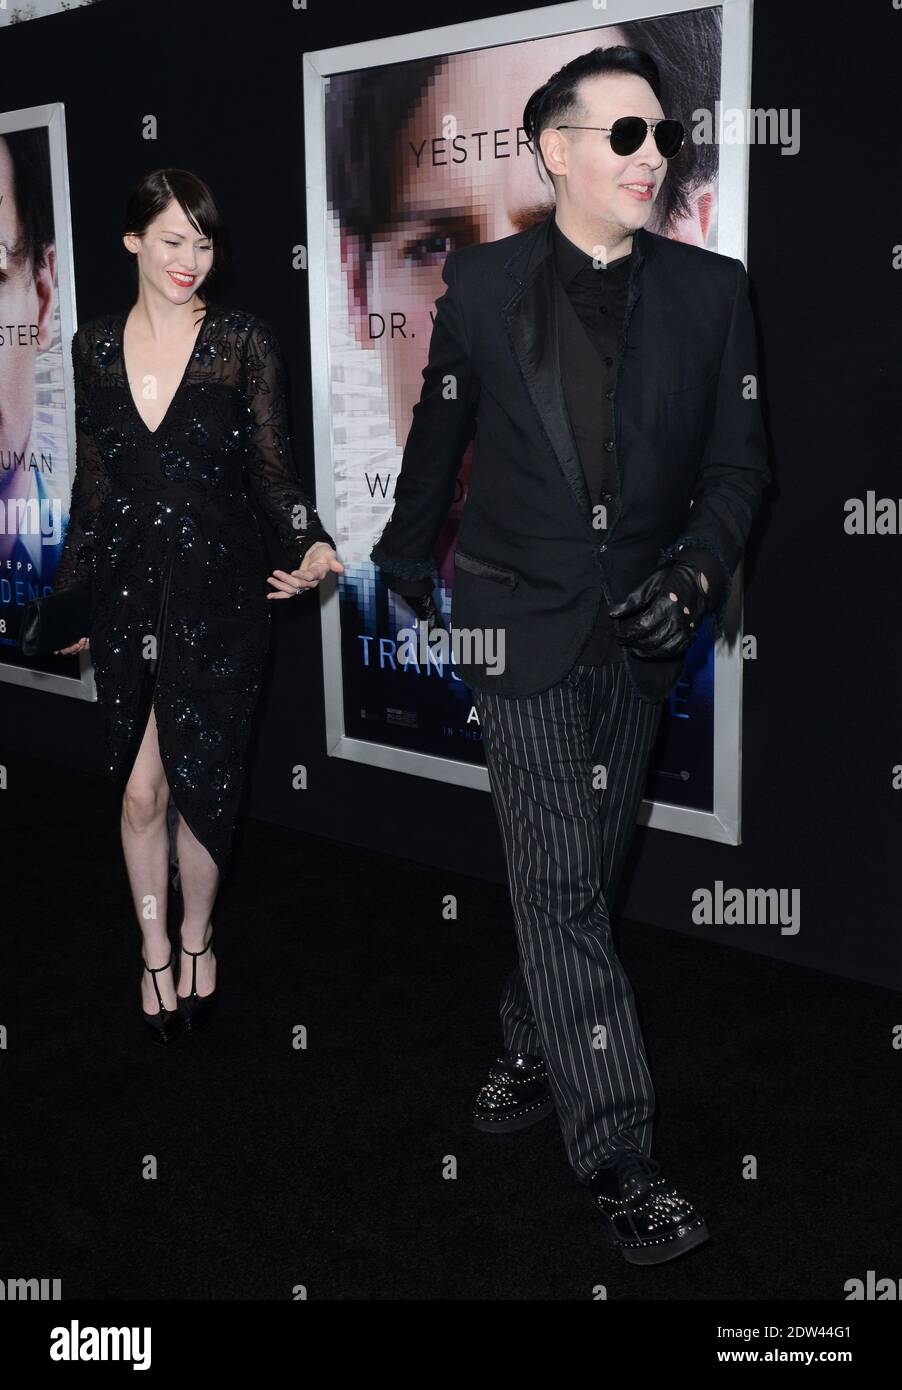 Marilyn Manson attends the premiere of Warner Bros. Pictures Transcendence at Regency Village Theatre in Los Angeles, CA, USA, on April 10, 2014. Photo by Lionel Hahn/ABACAPRESS.COM Stock Photo